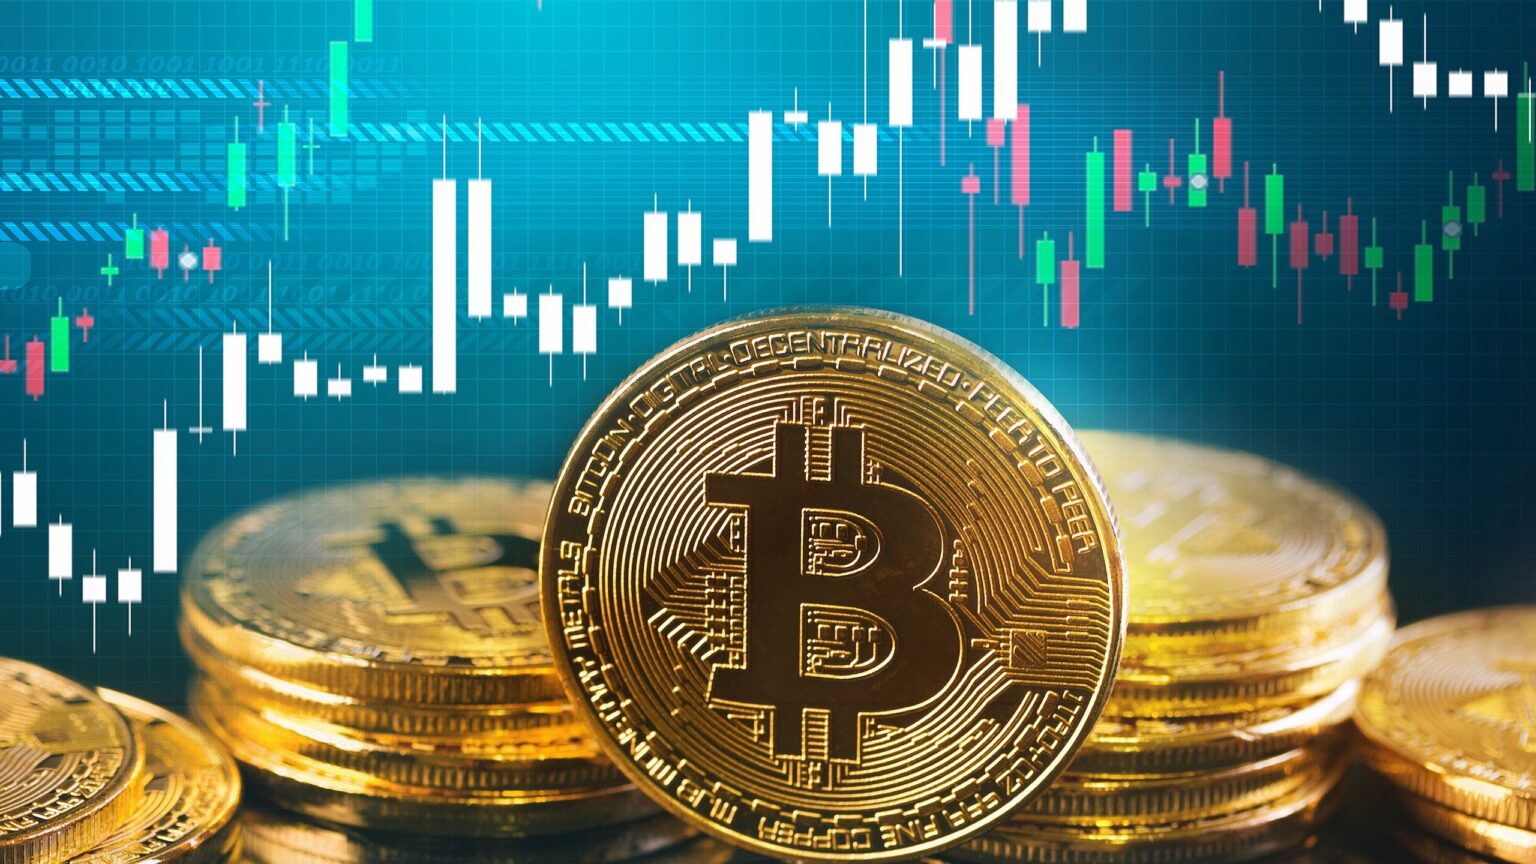 Bitcoin Could Hit $45,000 by May 20 Based on Past Trends, Says Report